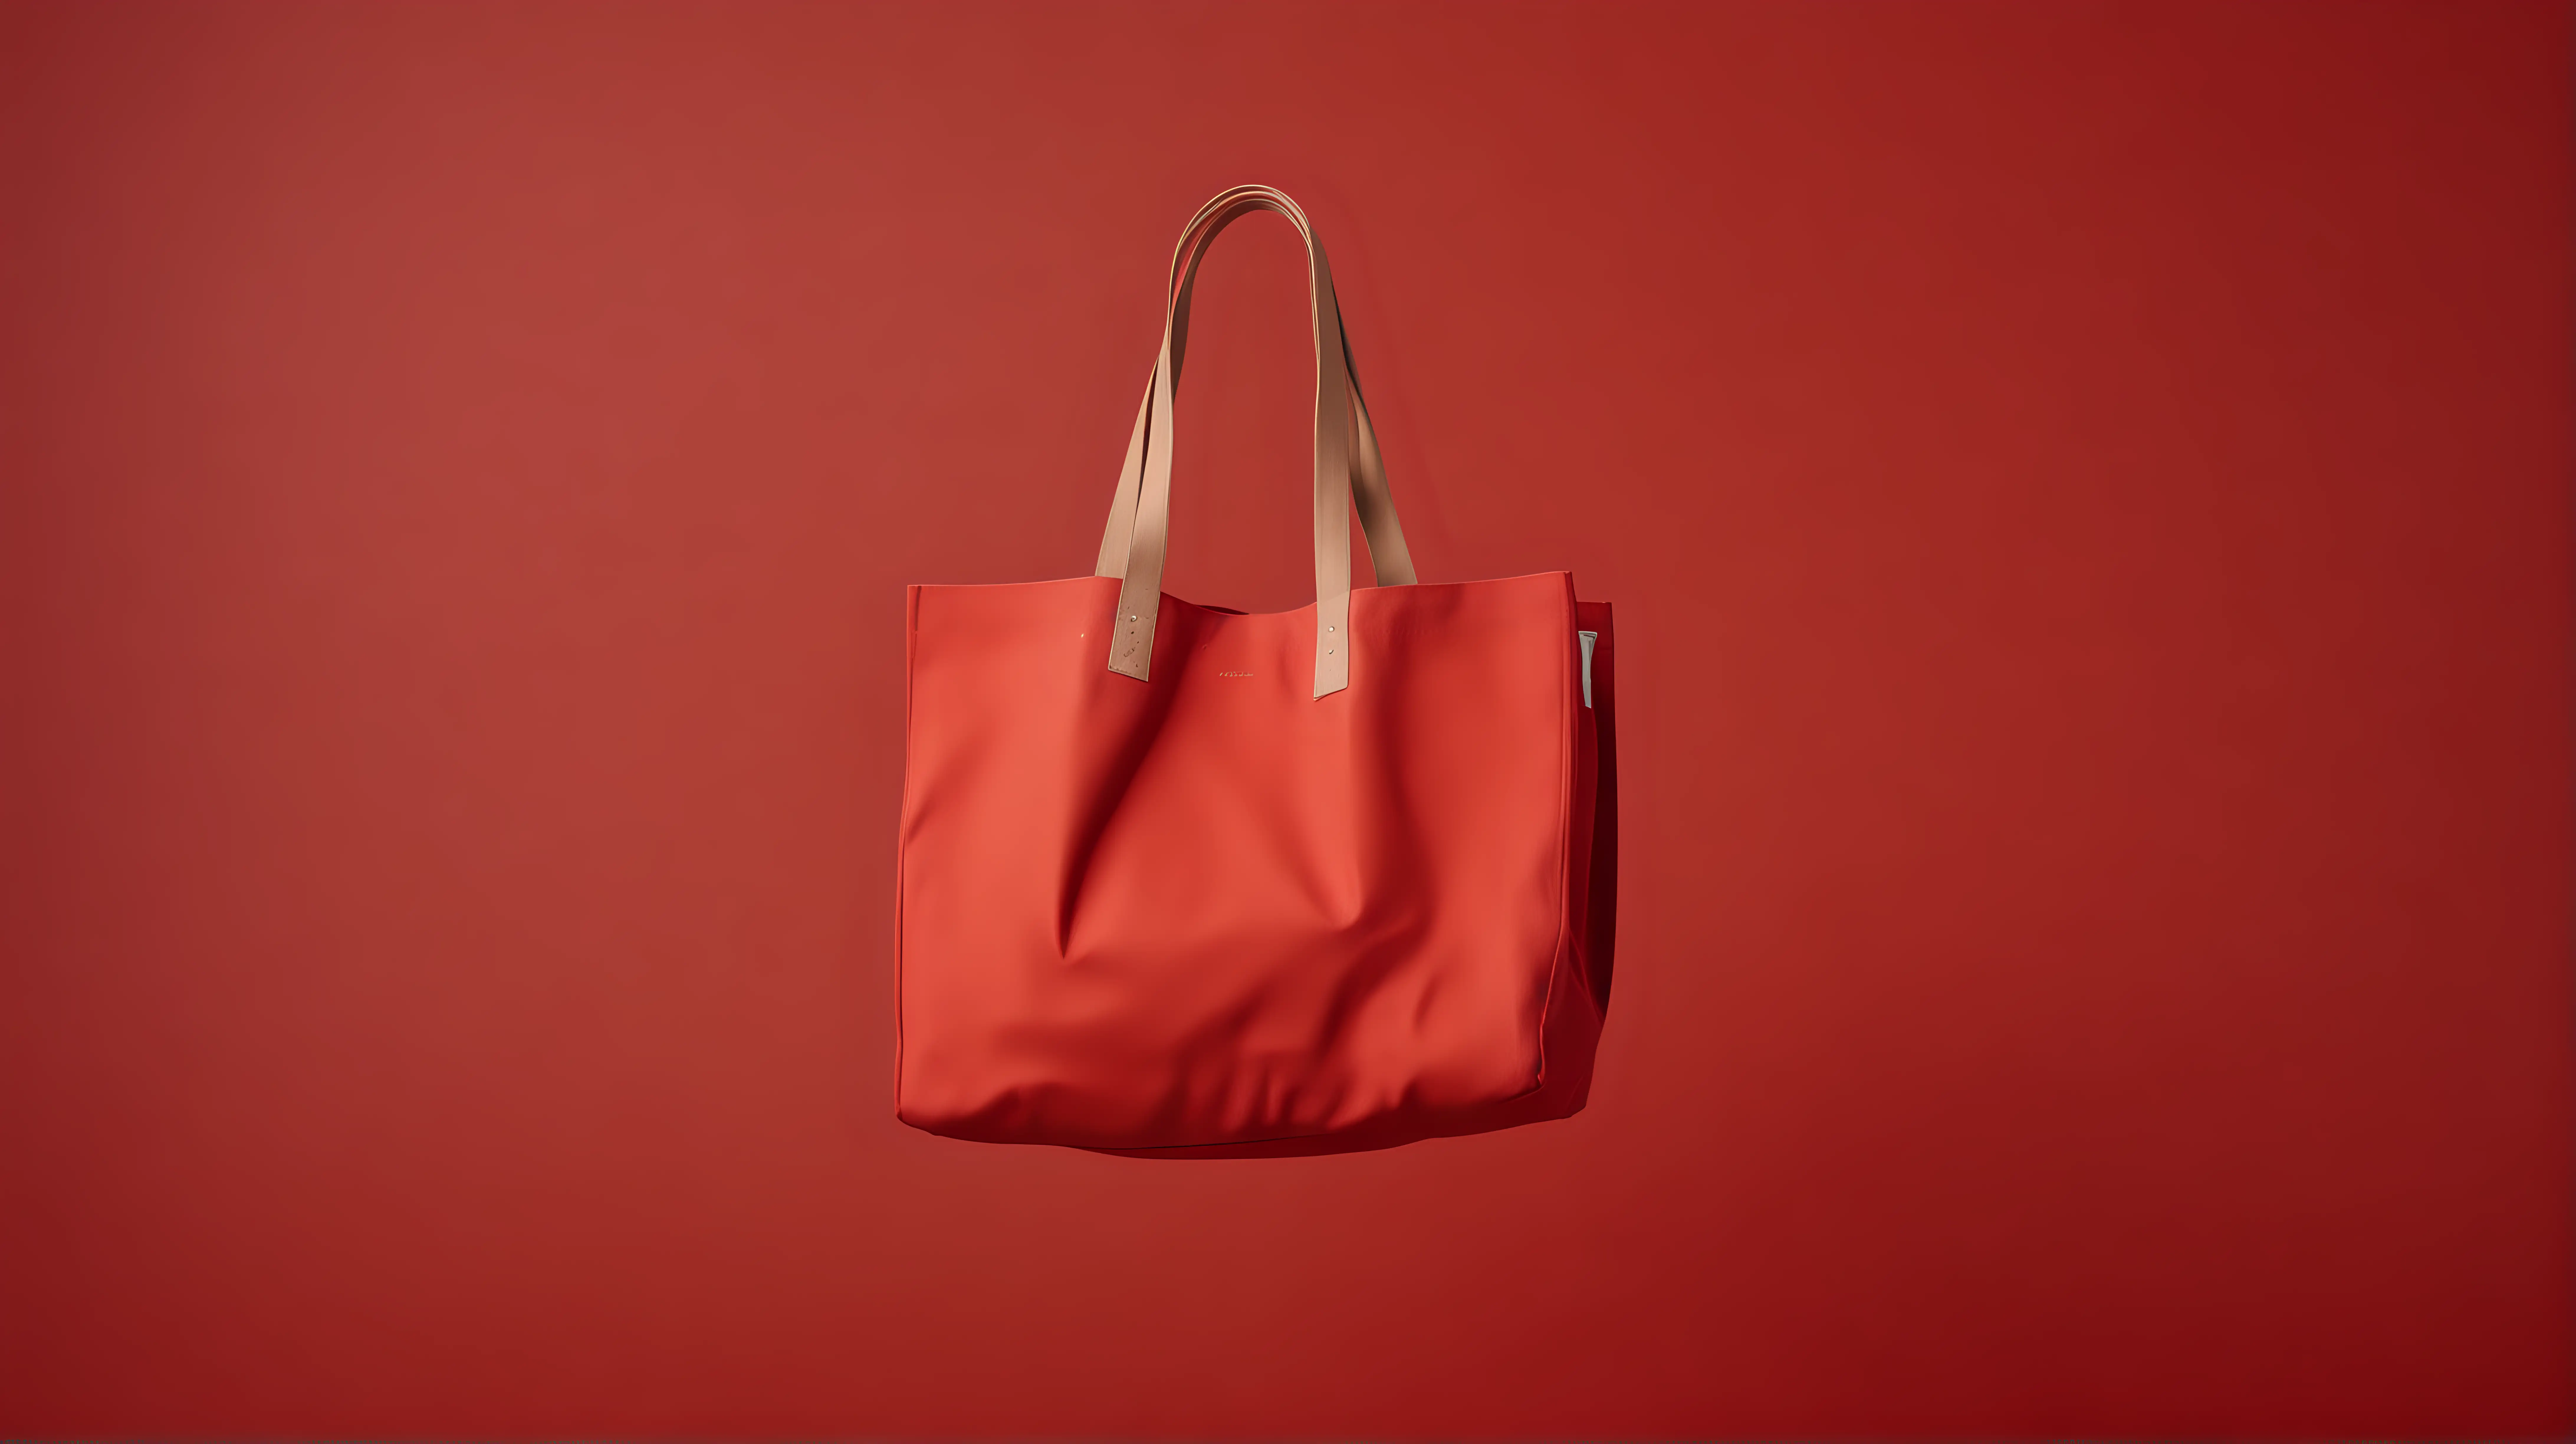 Surreal Red Canvas Tote on Dsseldorf Photography Background